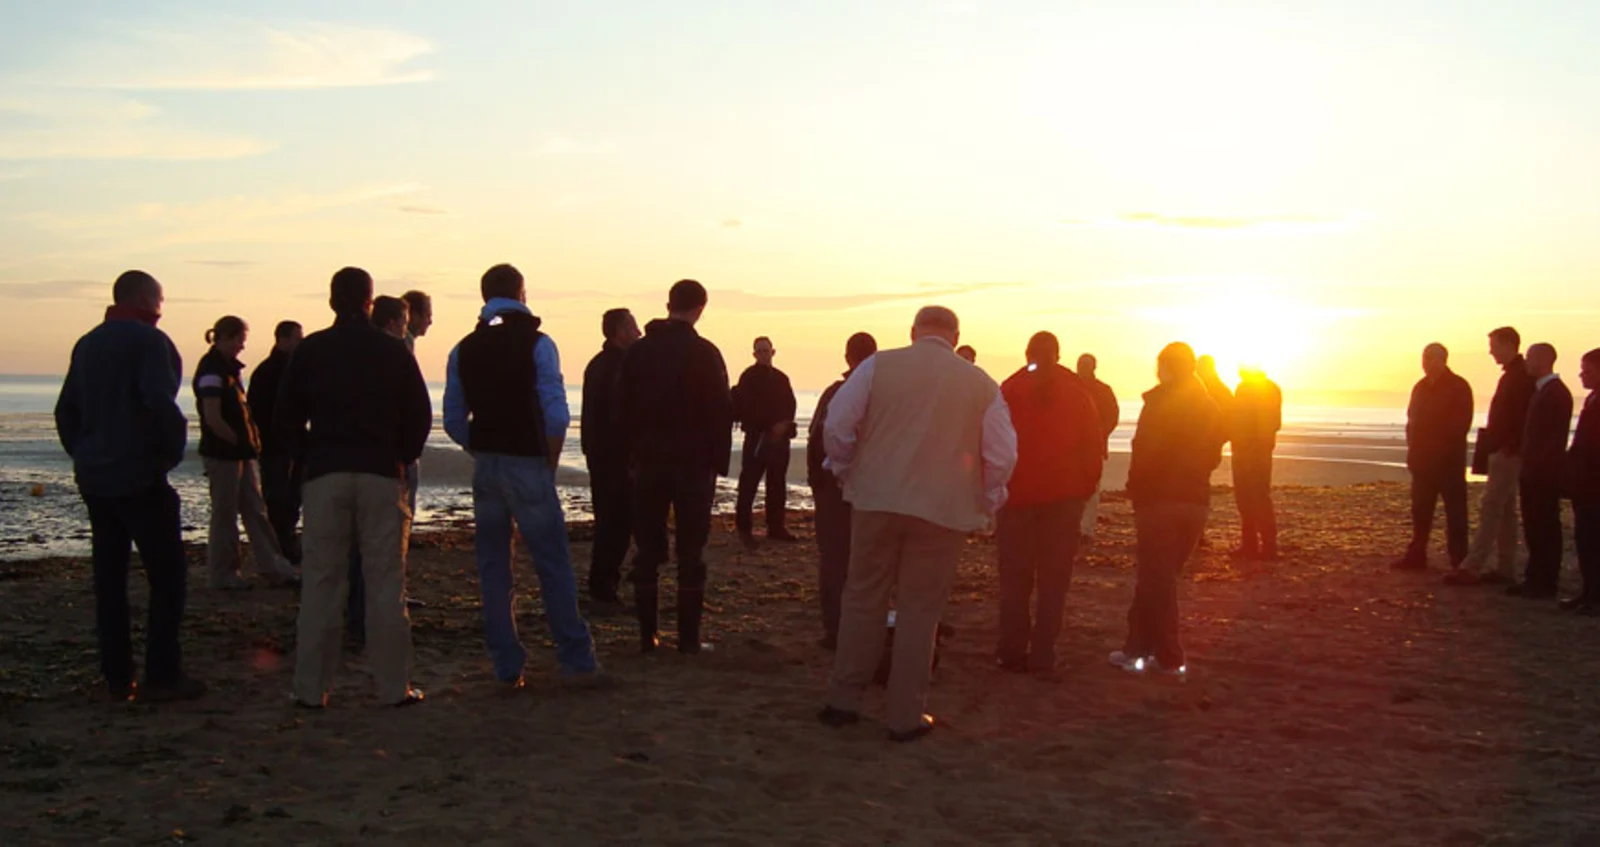 People gathered at sunset on a Normandy beach remembering D-Day.